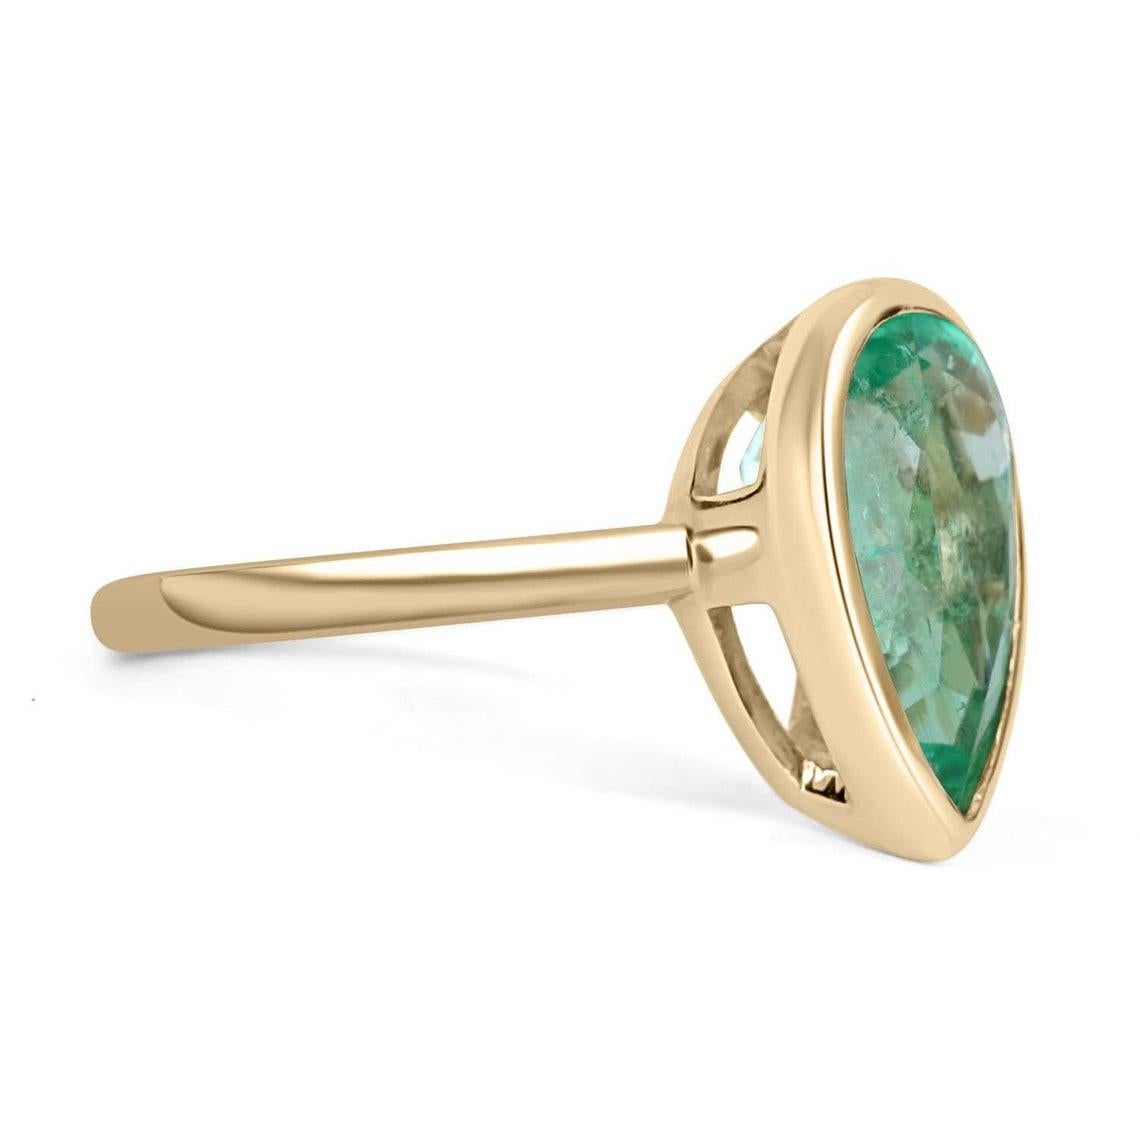 This ring is not for the faint of heart! Displayed is a Colombian emerald bezel-set, teardrop solitaire ring in 14K gold. This gorgeous solitaire ring carries a full 4.22-carat emerald that will have you gazing at its mystic beauty. This large gem